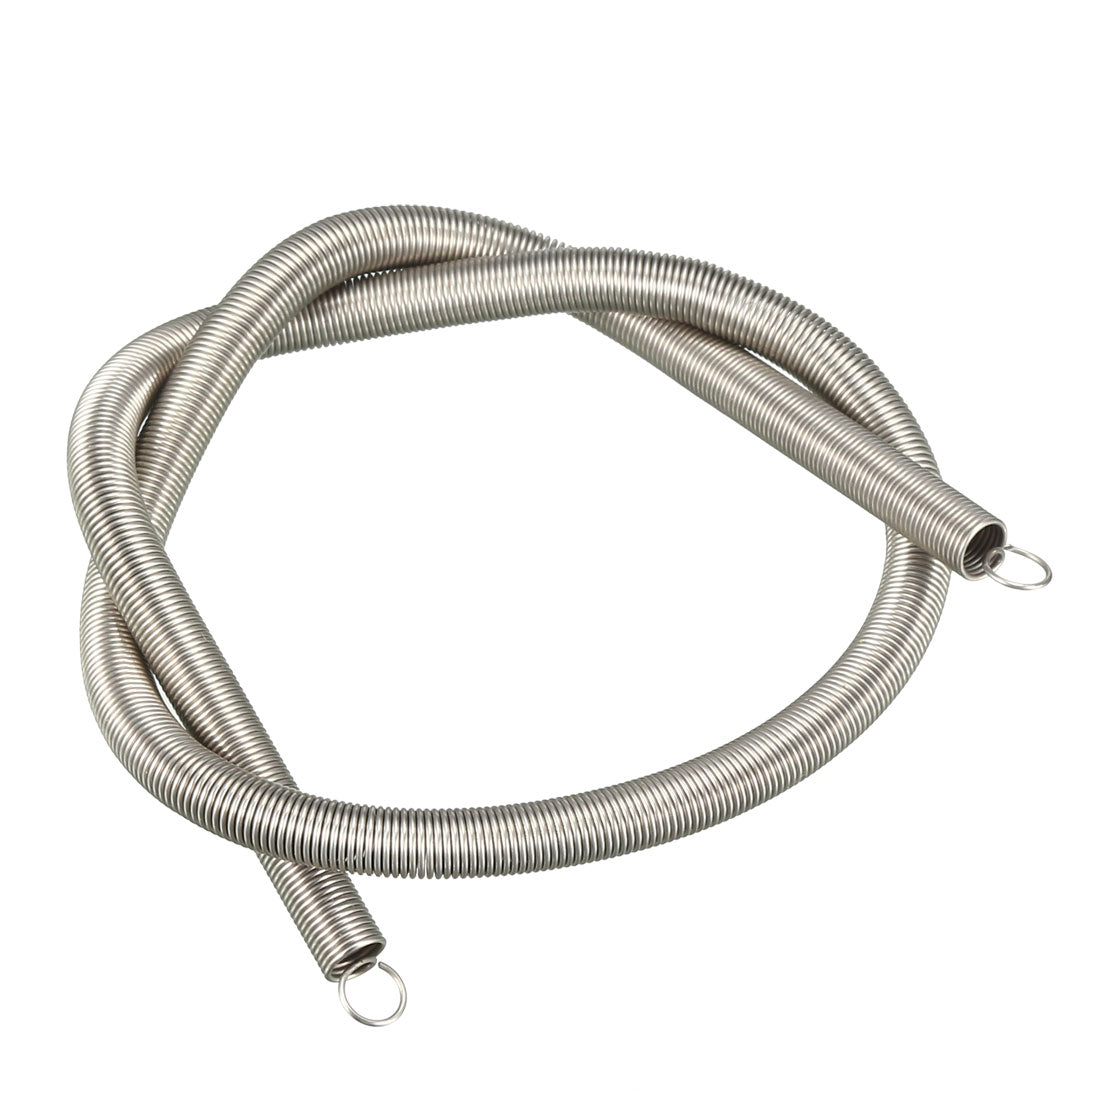 uxcell Uxcell Extended Tension Spring Wire Diameter 0.02", OD 0.2", Free Length 11.81"